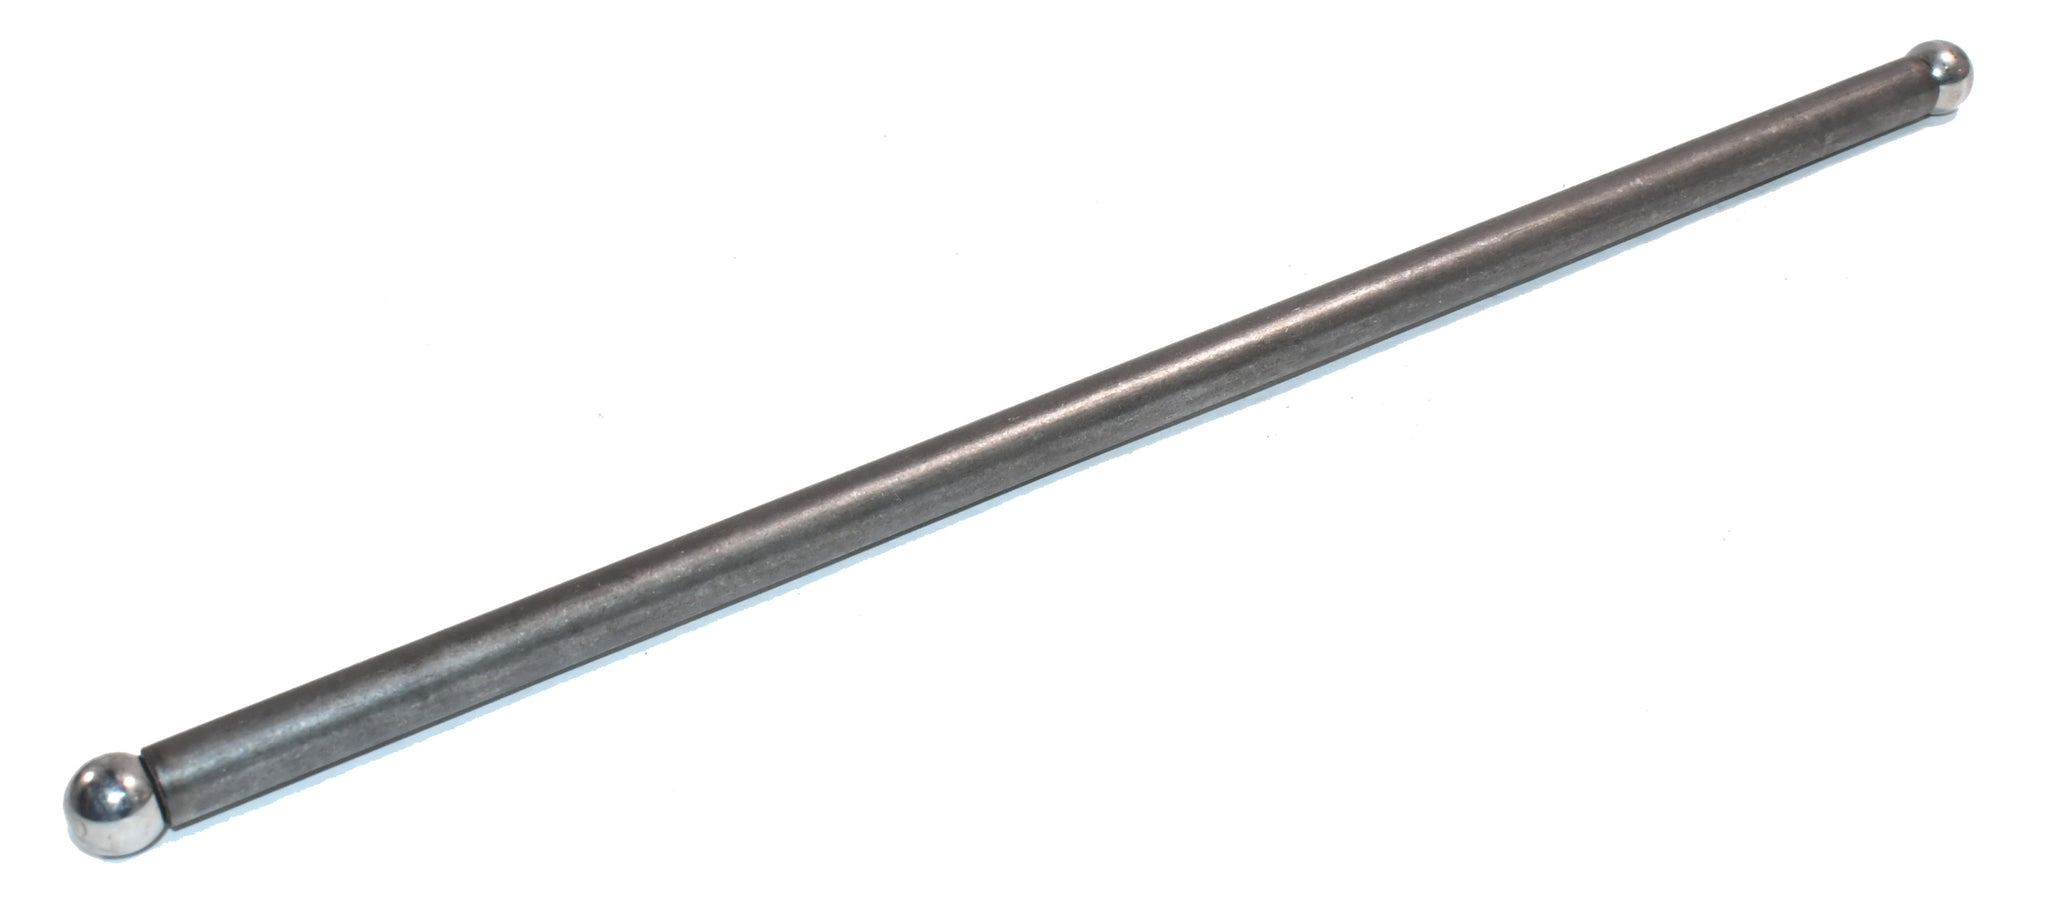 Pushrod for Ford FE engines +.030" fits 1968-1970 Fords with 428/CJ/SCJ engine & 1966-1969 Ford with 390 engine